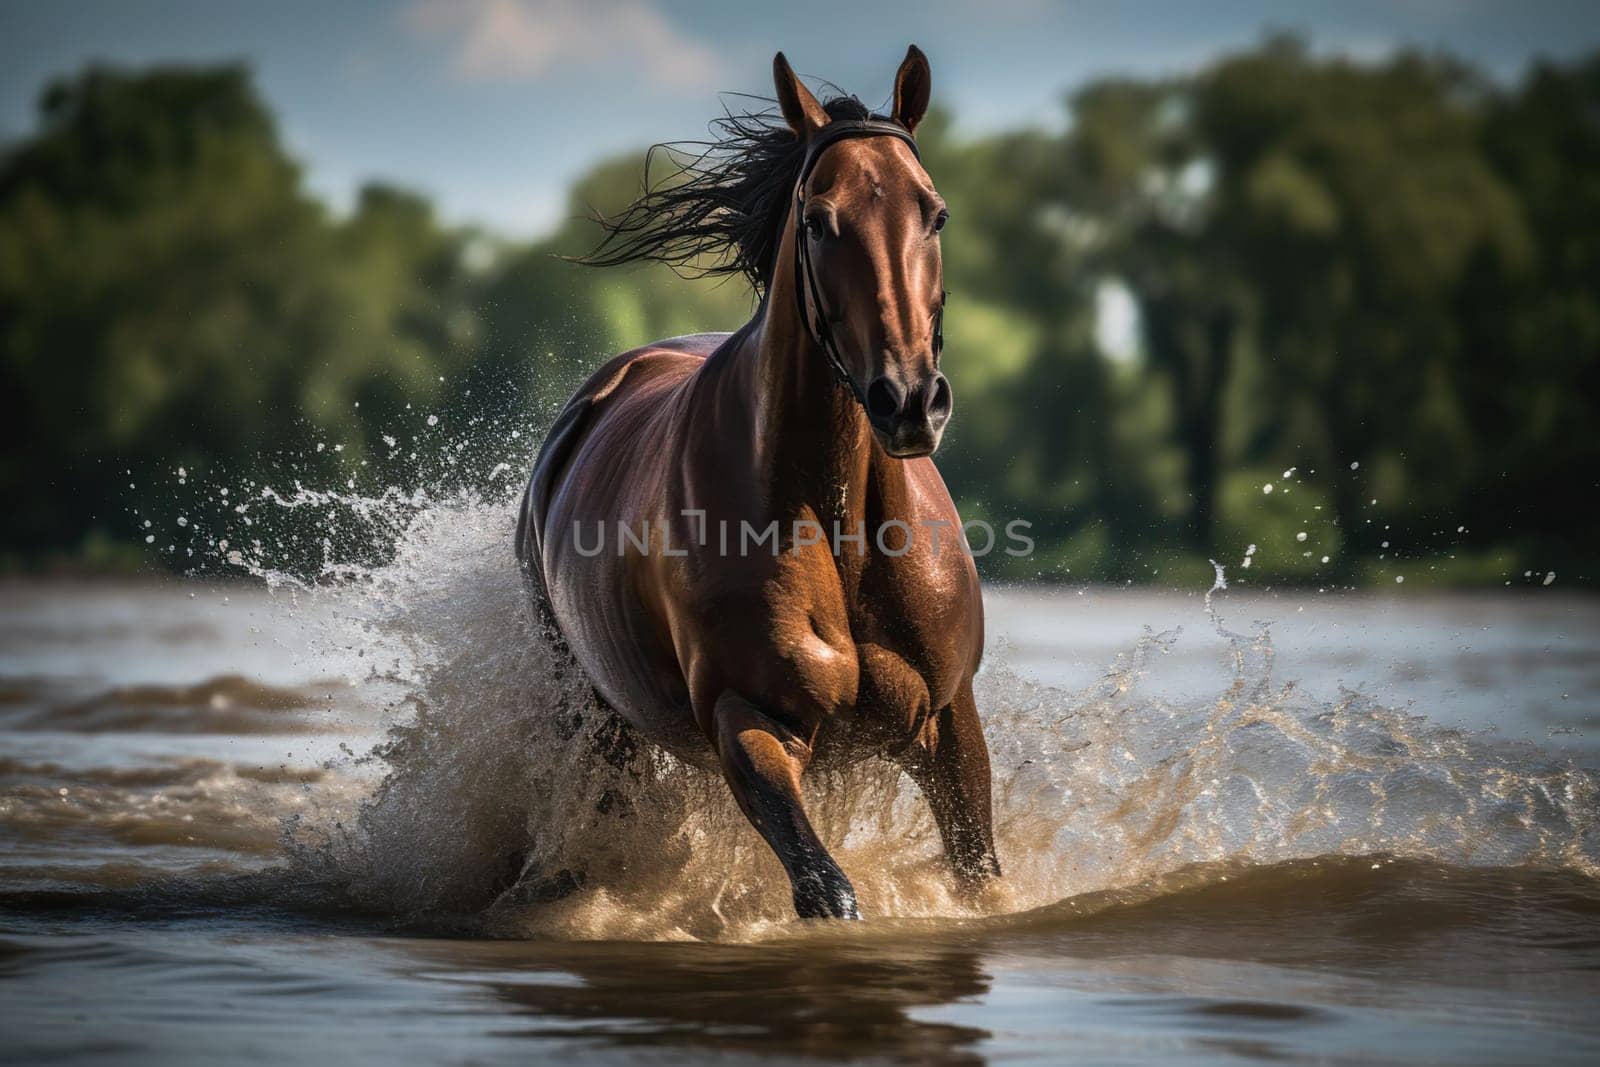 Racing Alongside A Flowing River, The Horse Showcases Its Strength And Grace Against The Backdrop Of A Serene Waterway